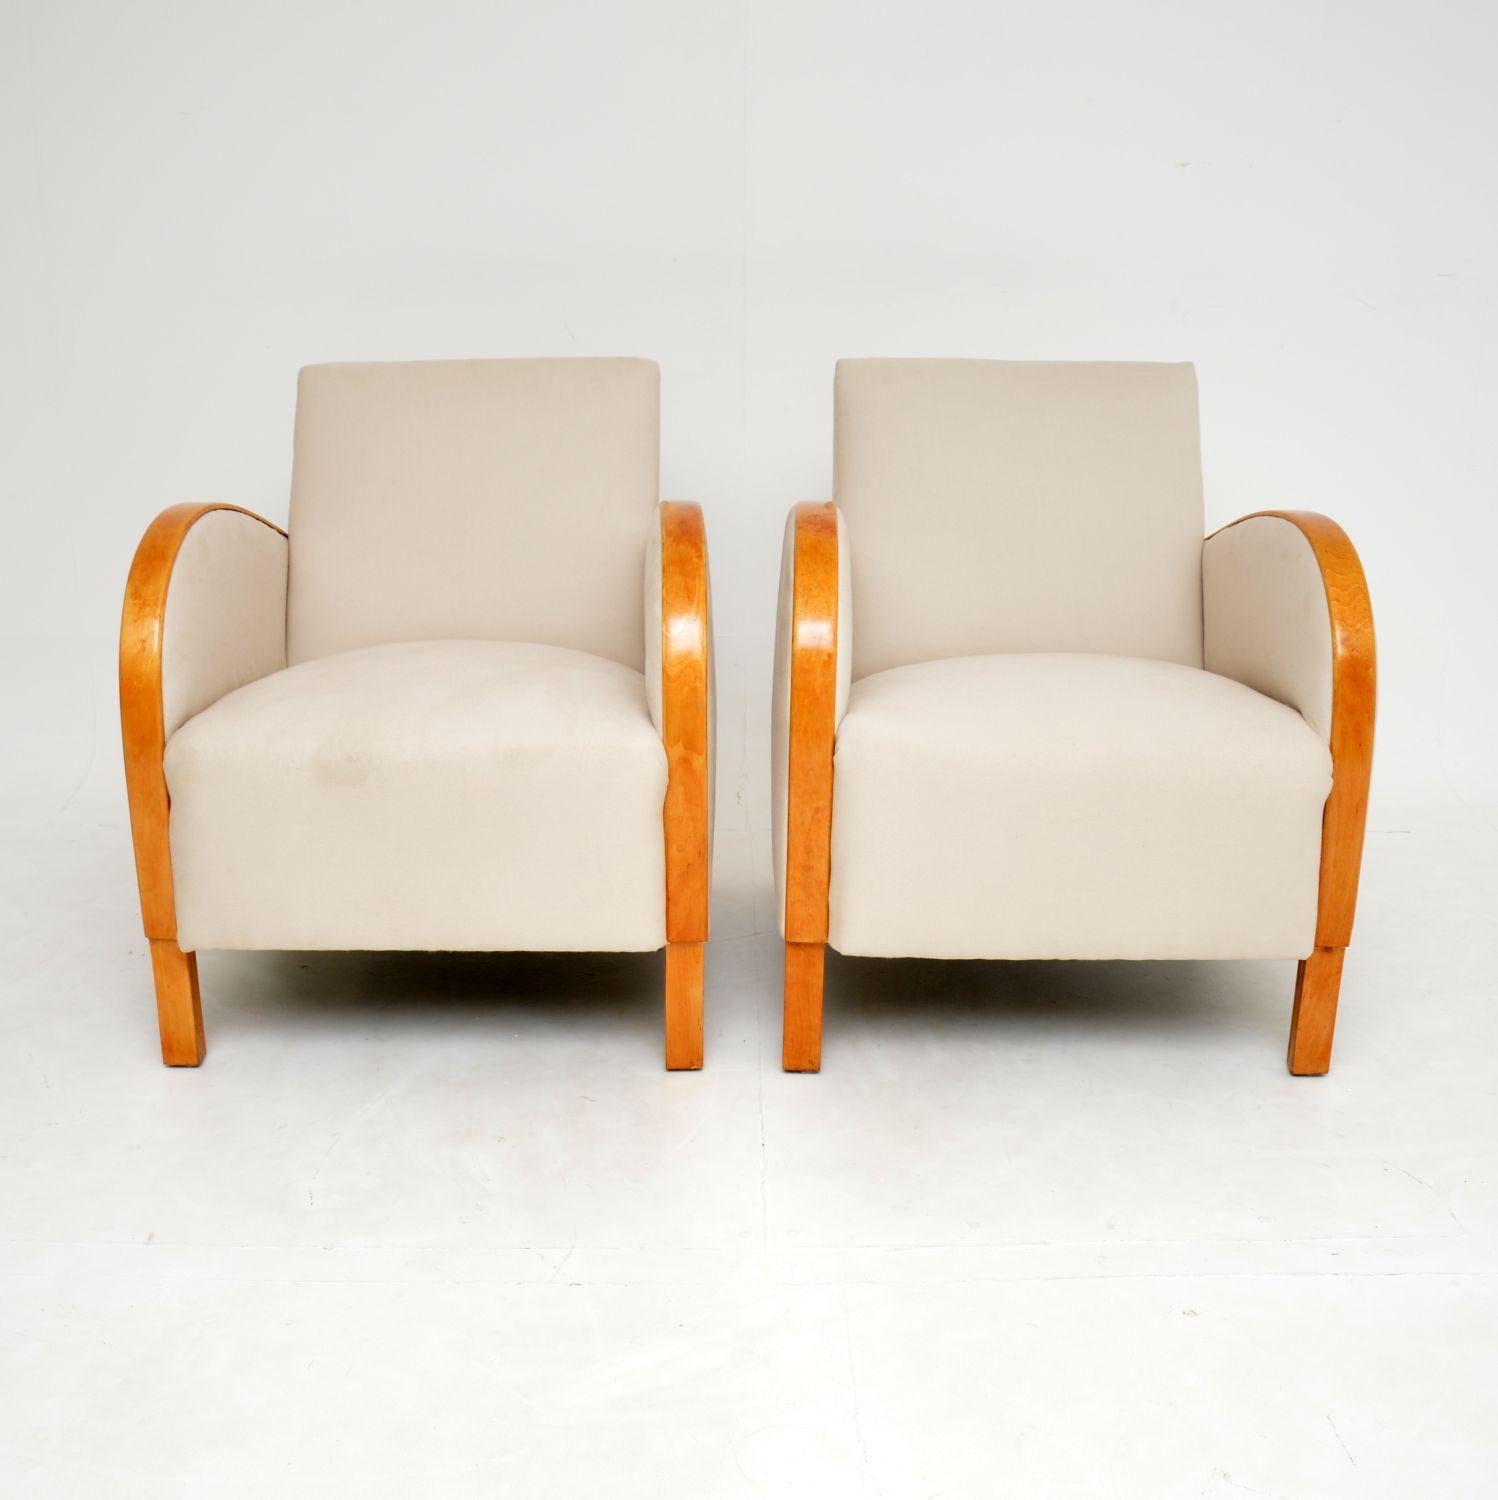 A stunning & very stylish pair of original Art Deco period Swedish armchairs in satin birch. These were recently imported from Sweden & date from the 1930’s period.
The quality is fantastic, these have a beautiful design and are very comfortable.